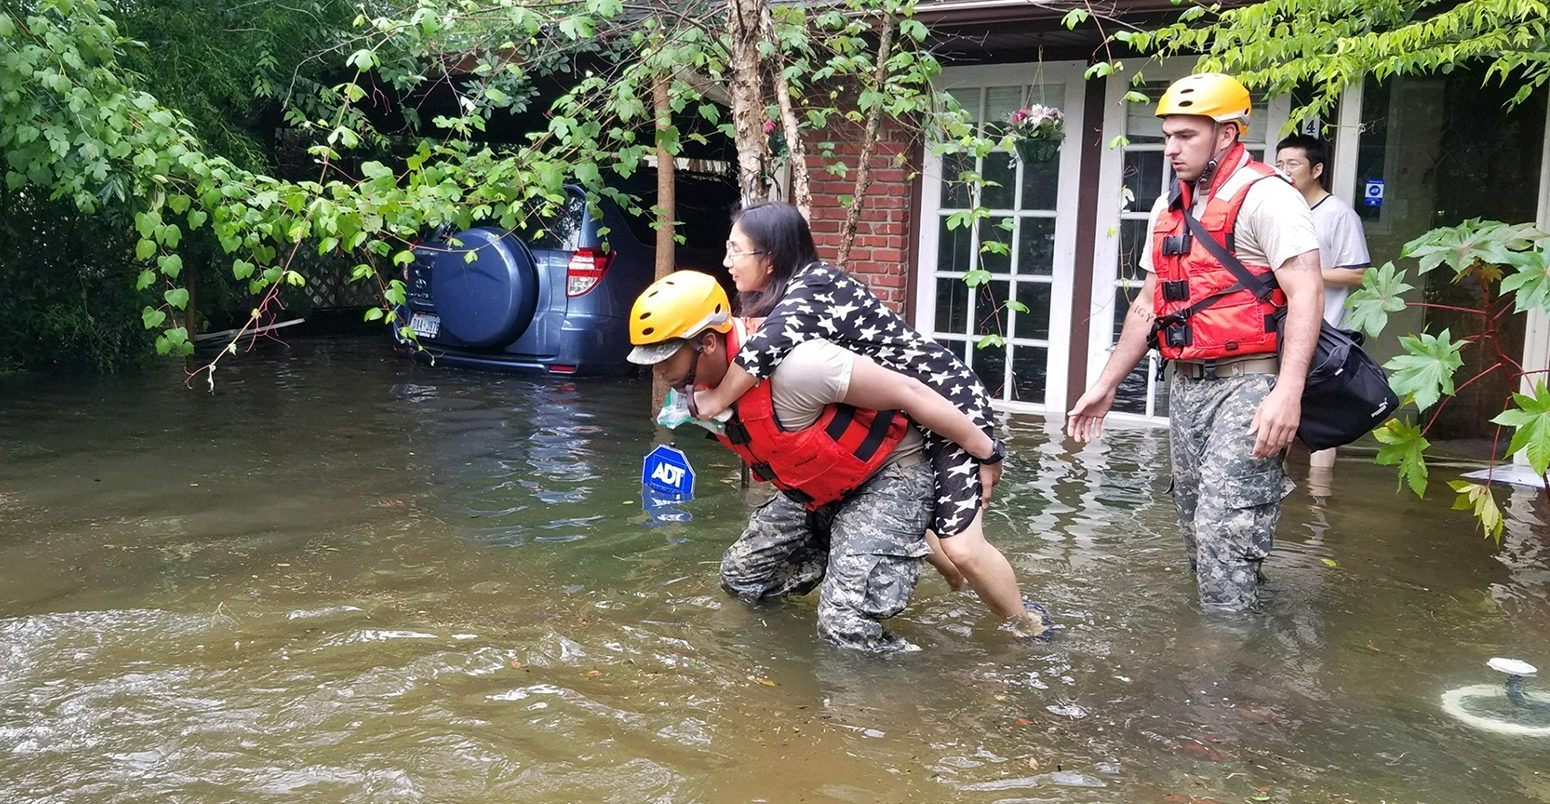 National guardsmen rescue residents stranded by flooding after Hurricane Harvey hit the Texas coast, 27/08/2017, Houston, Texas.